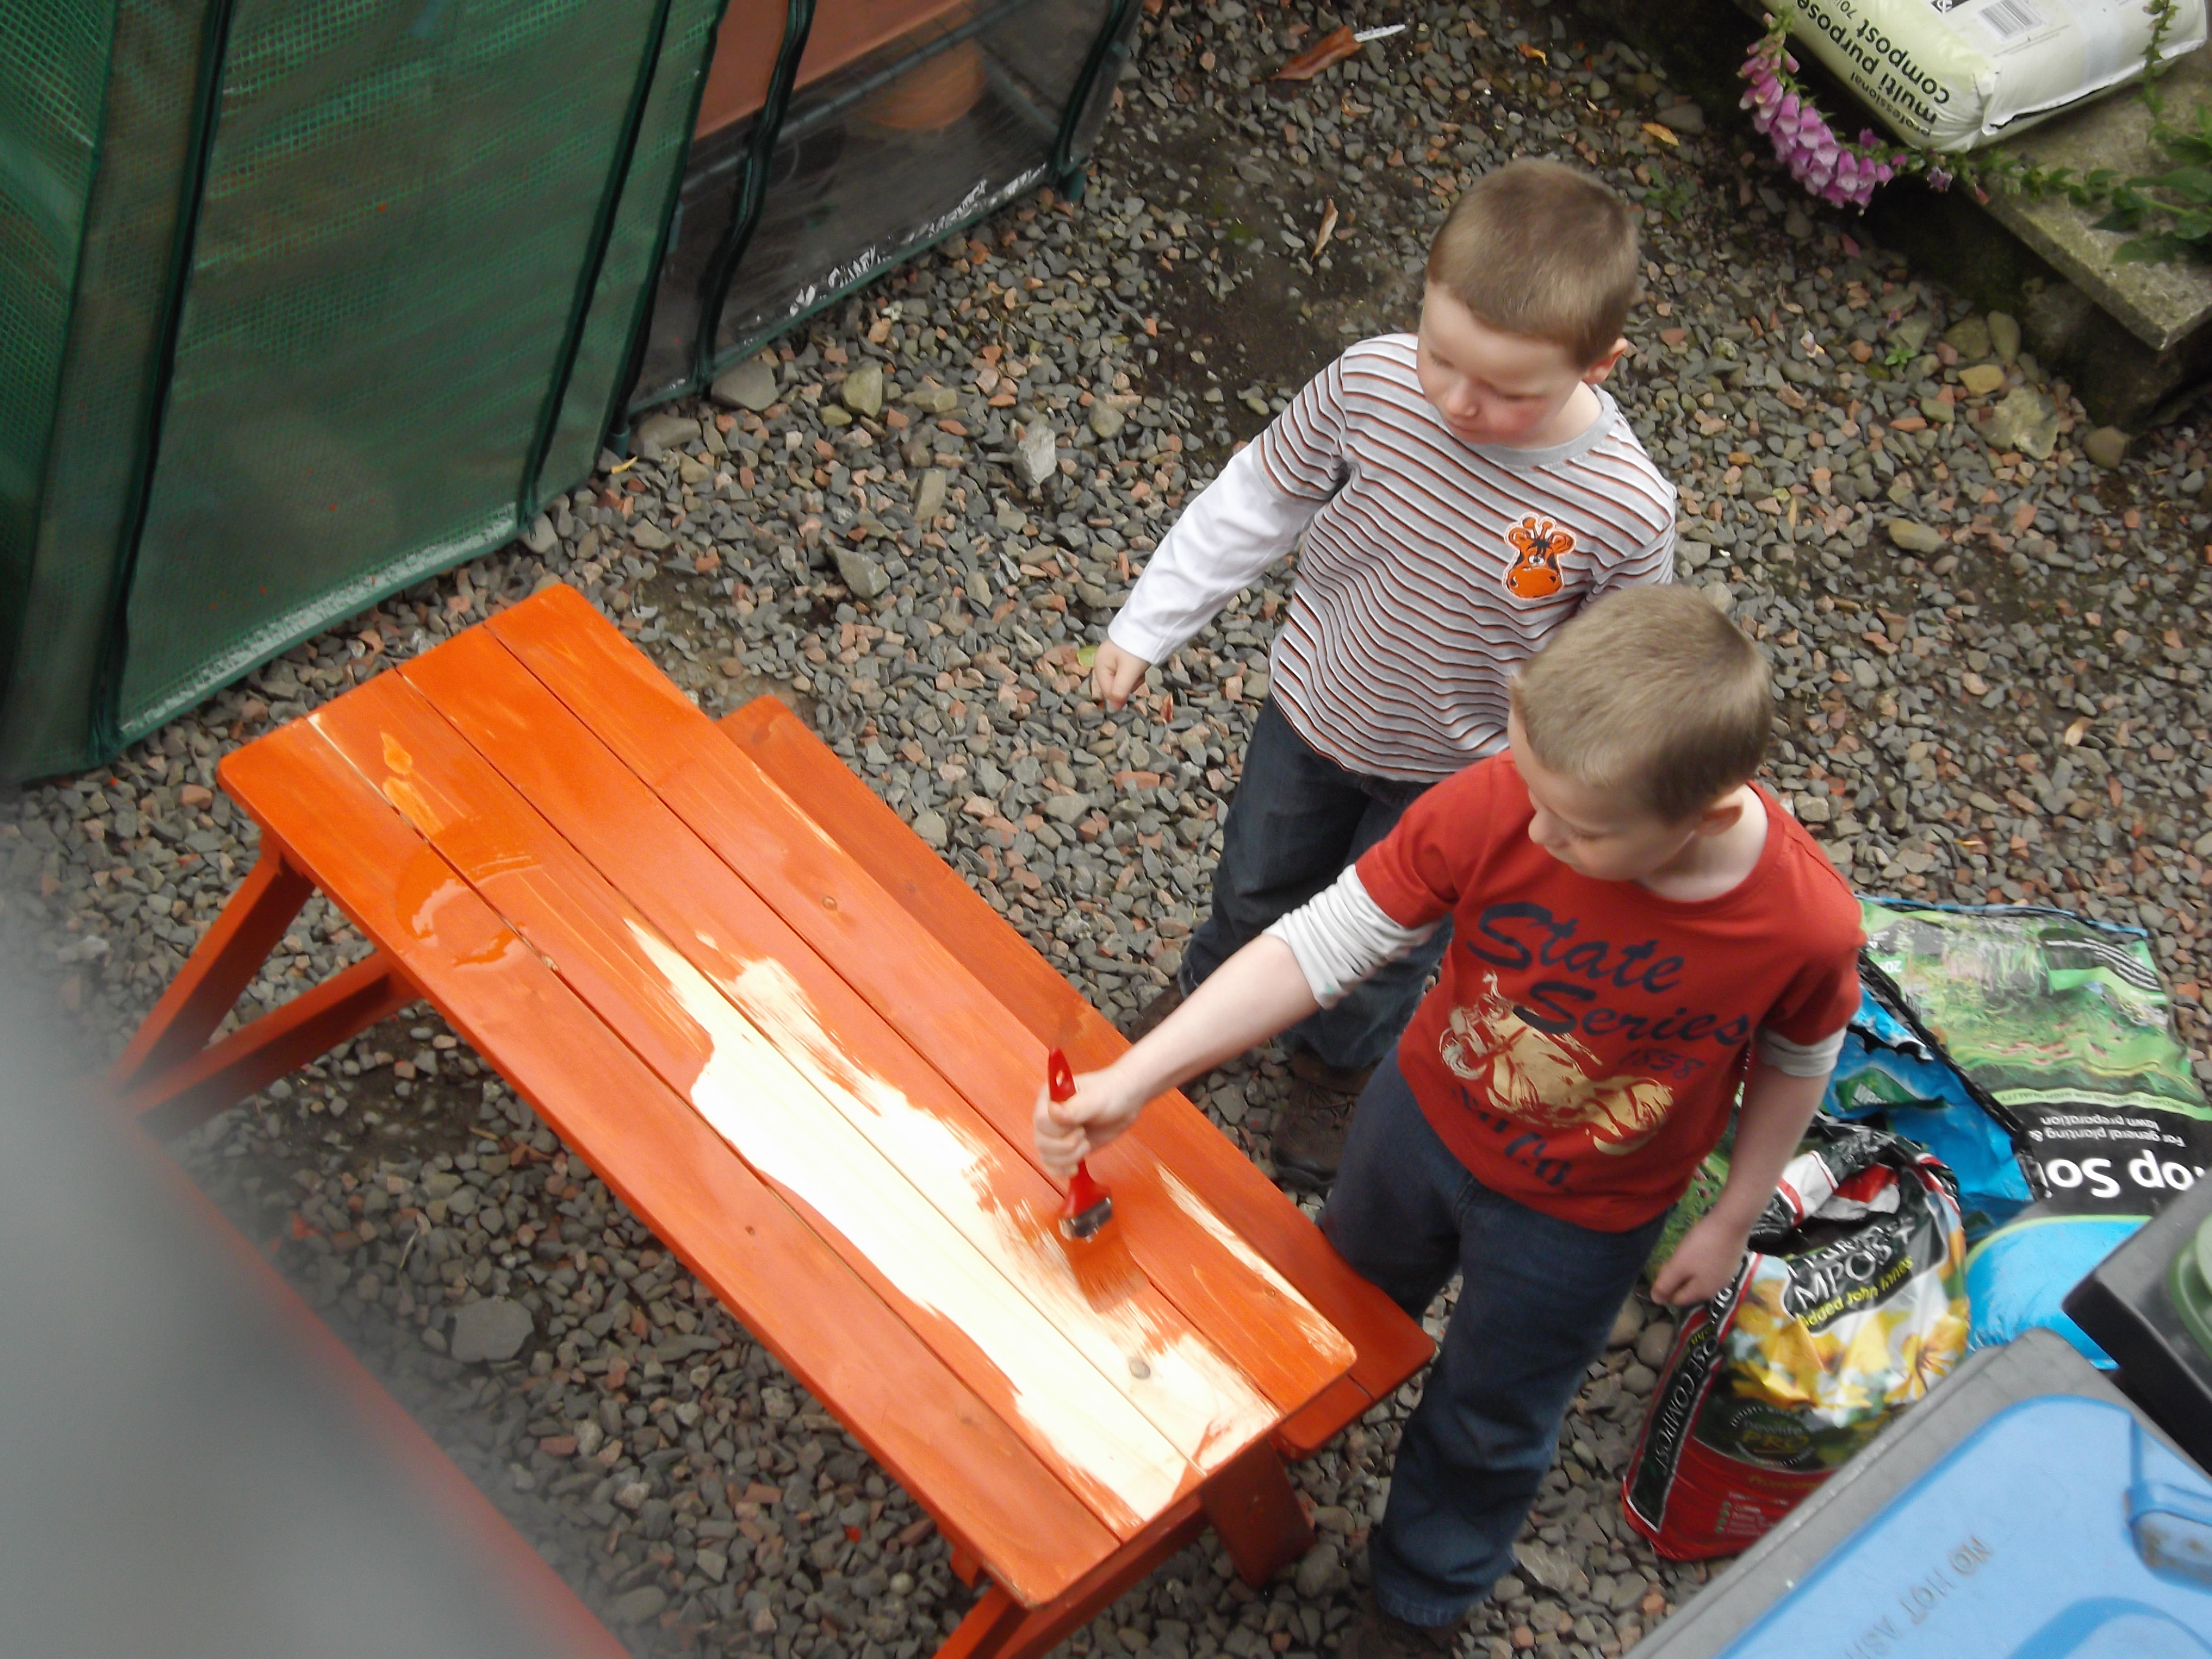 Boys weather-proofing the picnic bench